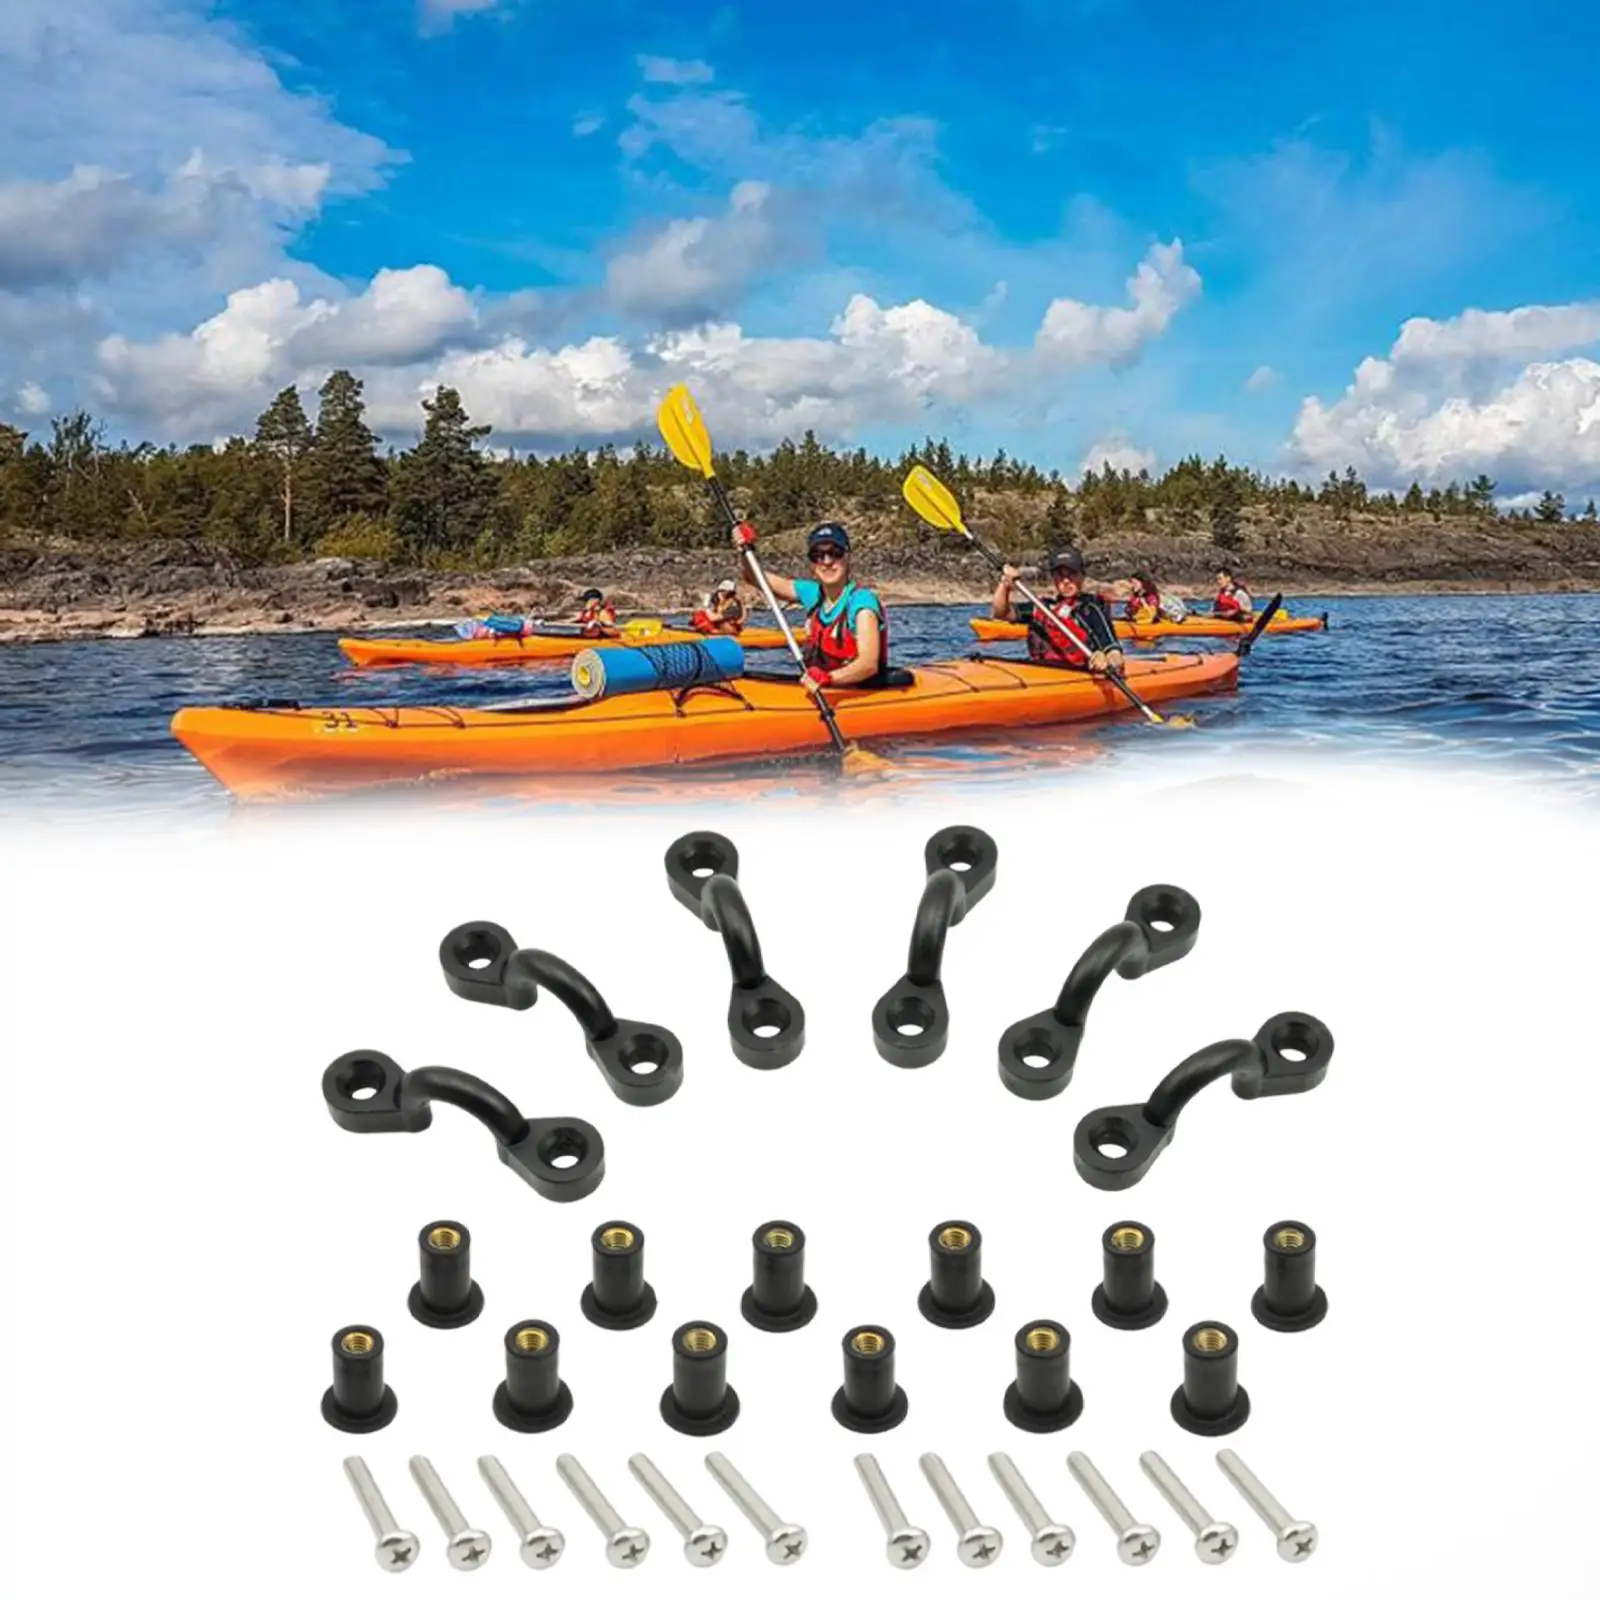 6 Kayak Humpback Handle Buckle with Mounting Screws Nuts Durable for Boat